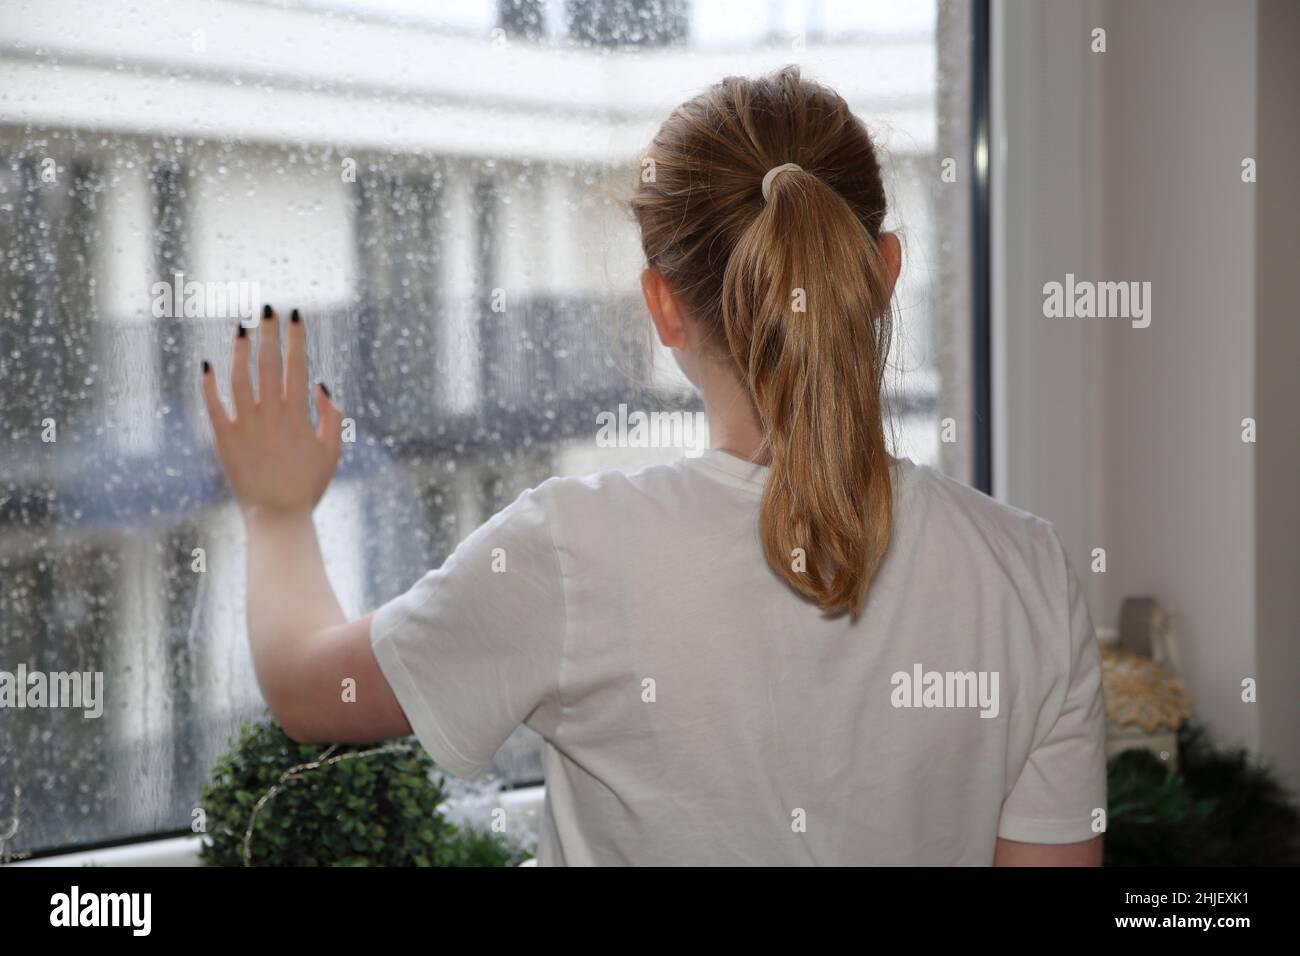 Blond-haired girl stand at the window touching glass by her hand, lonely, behind urban area, rainy deppresive weather Stock Photo